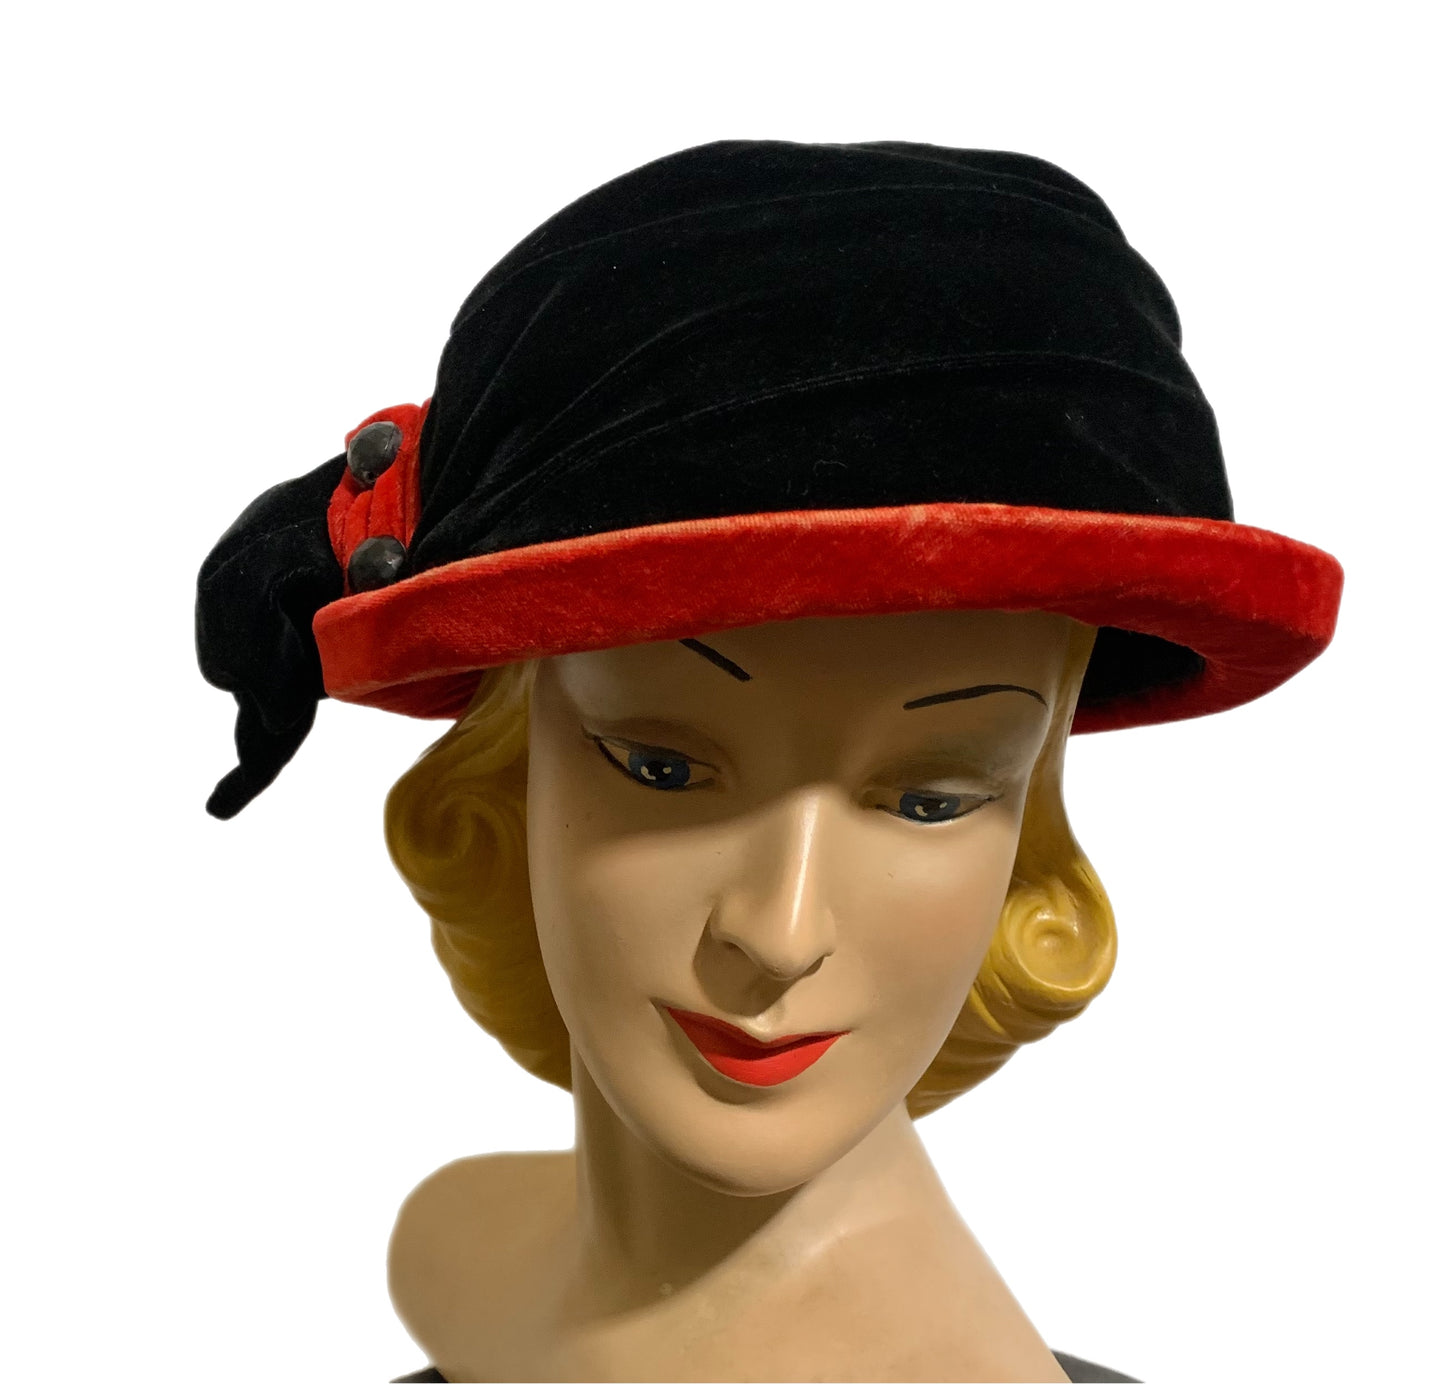 Black Velvet Curved Brim Hat with Tomato Red Accents circa 1910s